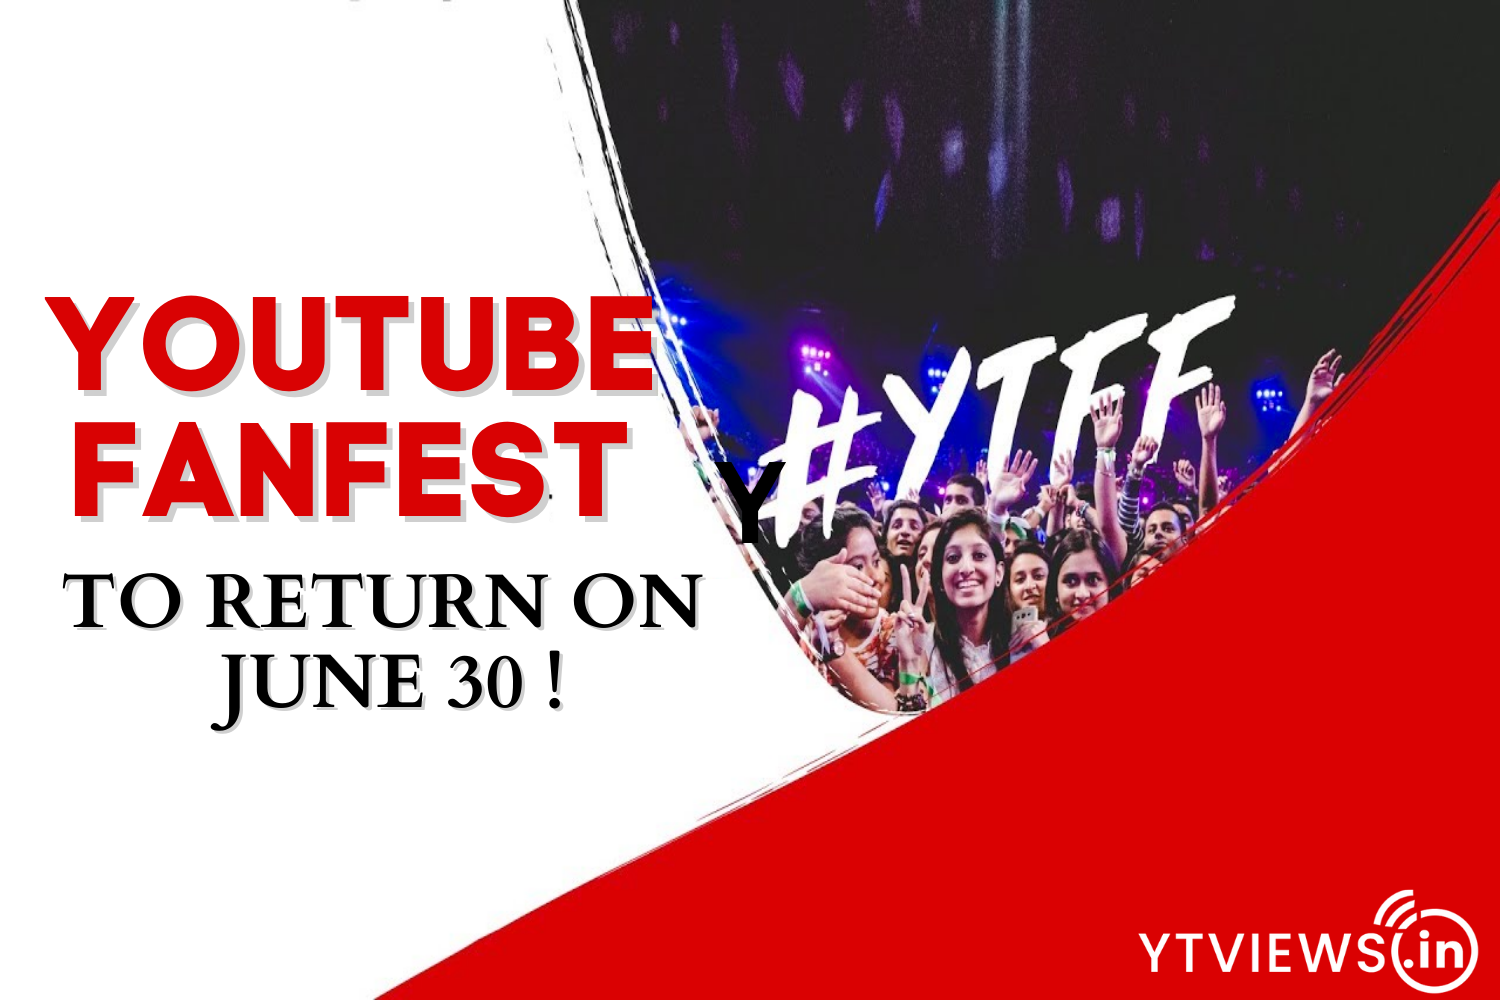 YouTube Fanfest To Return on June 30th